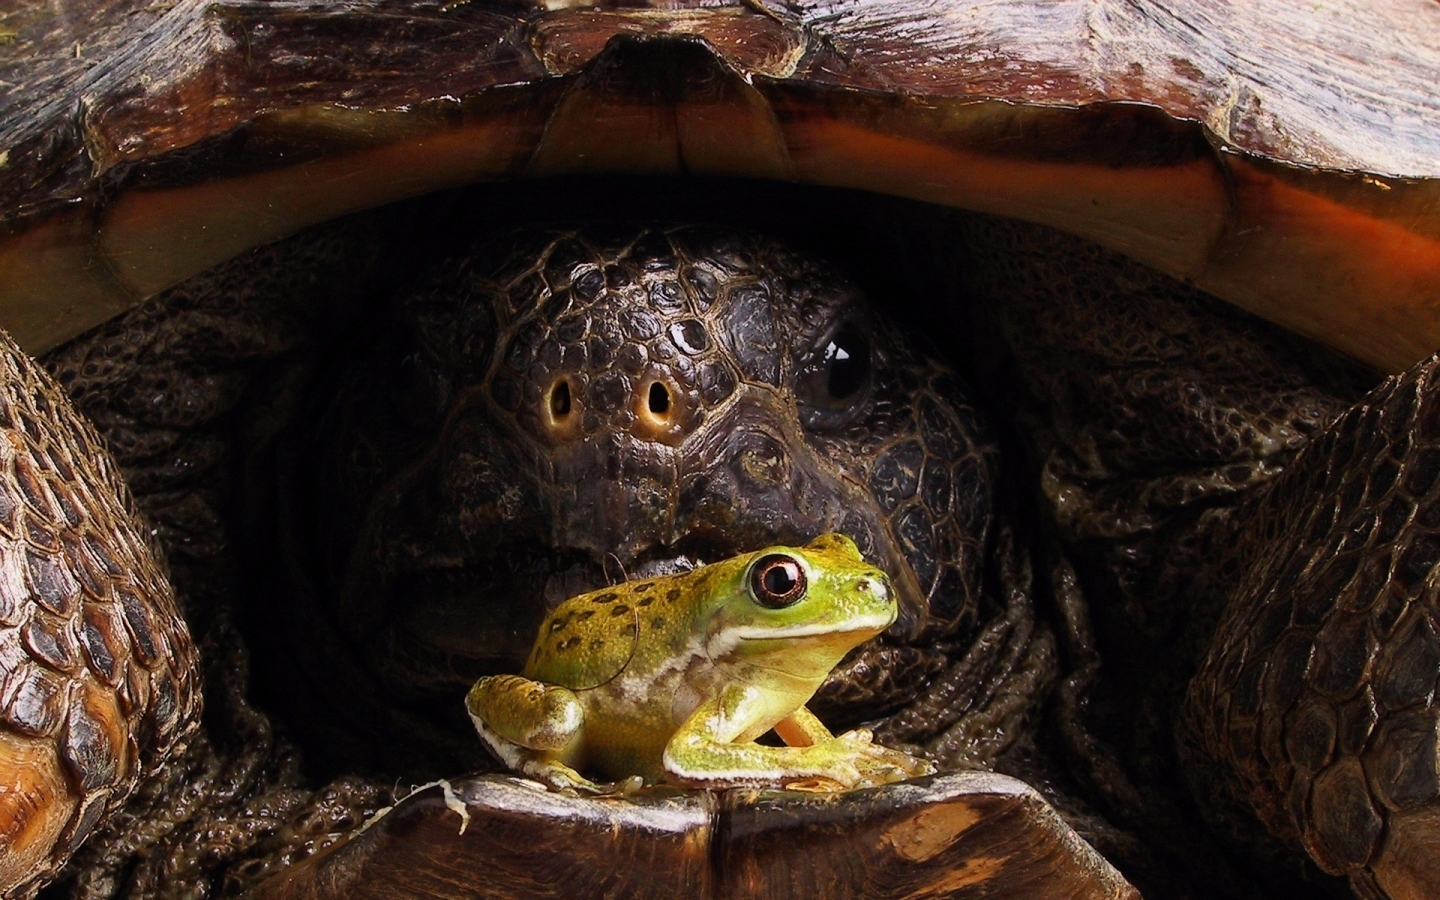 Big turtle and little frog for 1440 x 900 widescreen resolution